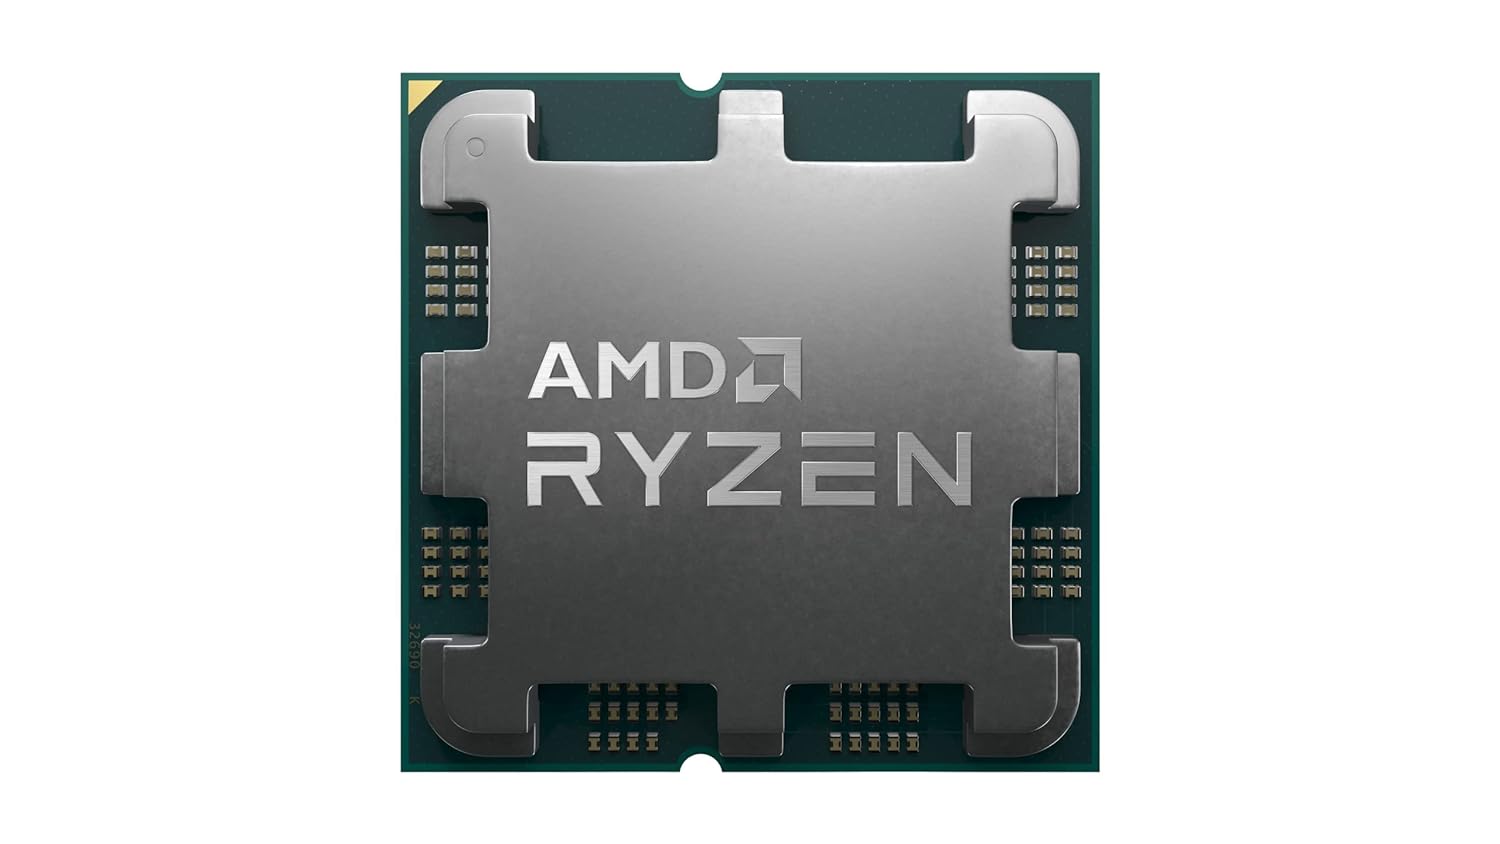 AMD Ryzen 9 7950X Processor With Radeon Graphics, Global Availability, 16 Cores 32 Threads, Base Clock 4.5GHz, Max Boost Clock 5.7GHz, Unlocked for Overclocking, AM5 CPU Socket